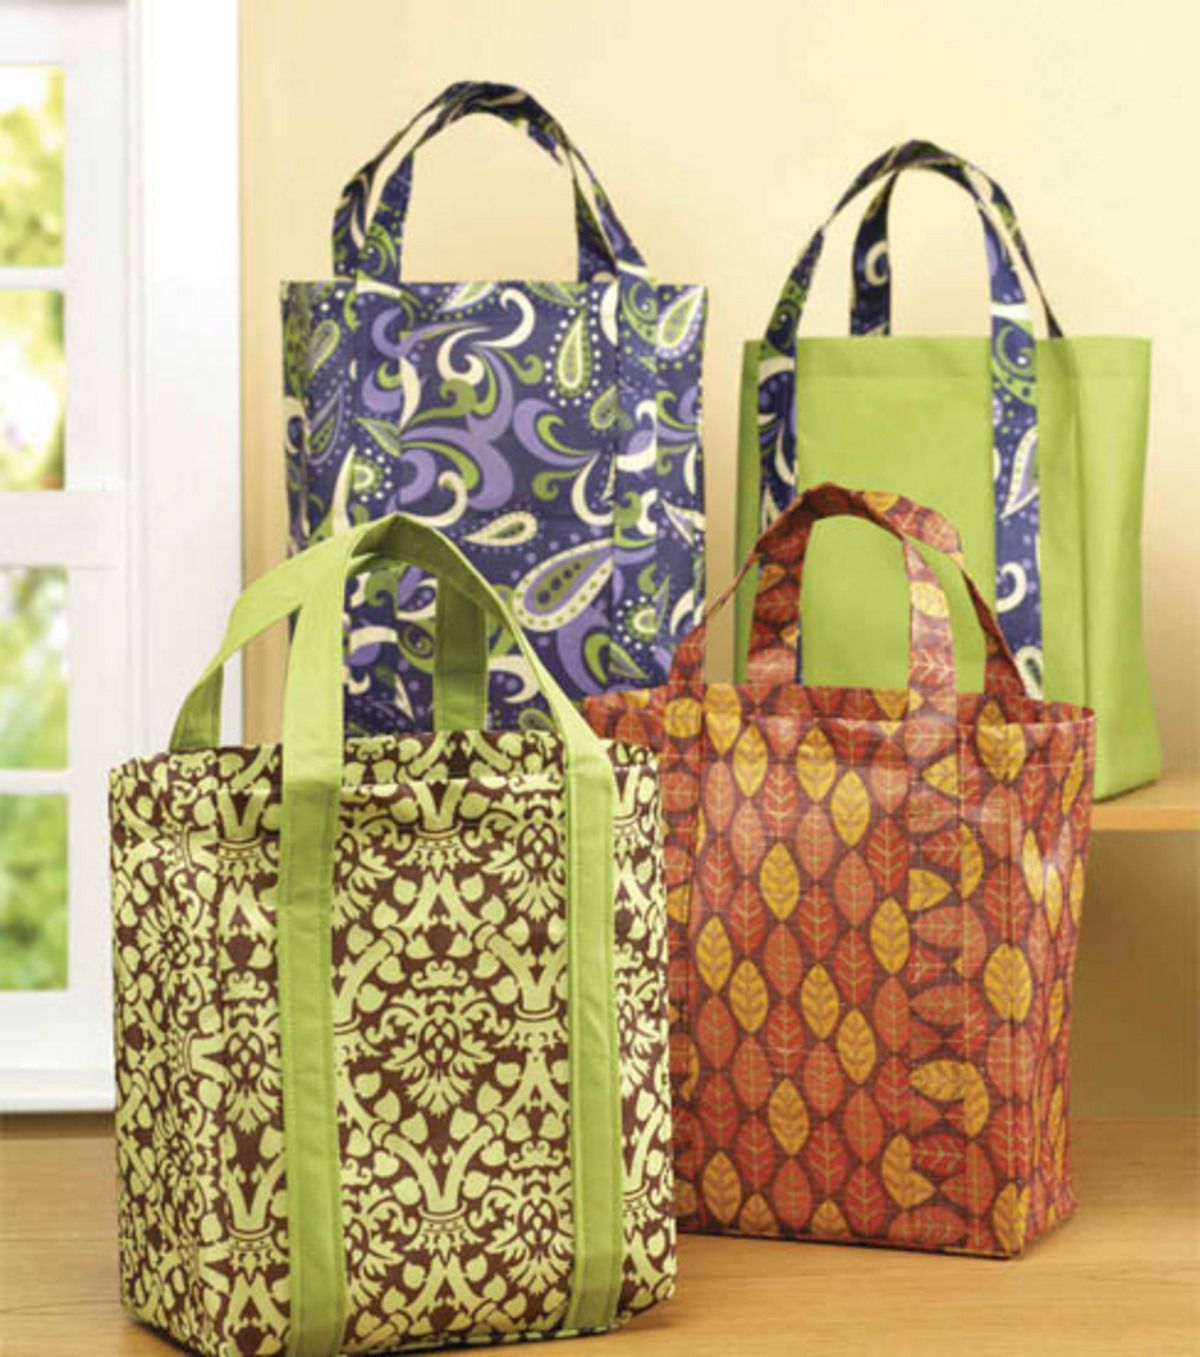 Make your own shopping bags………..now you can wash them without them falling apart!